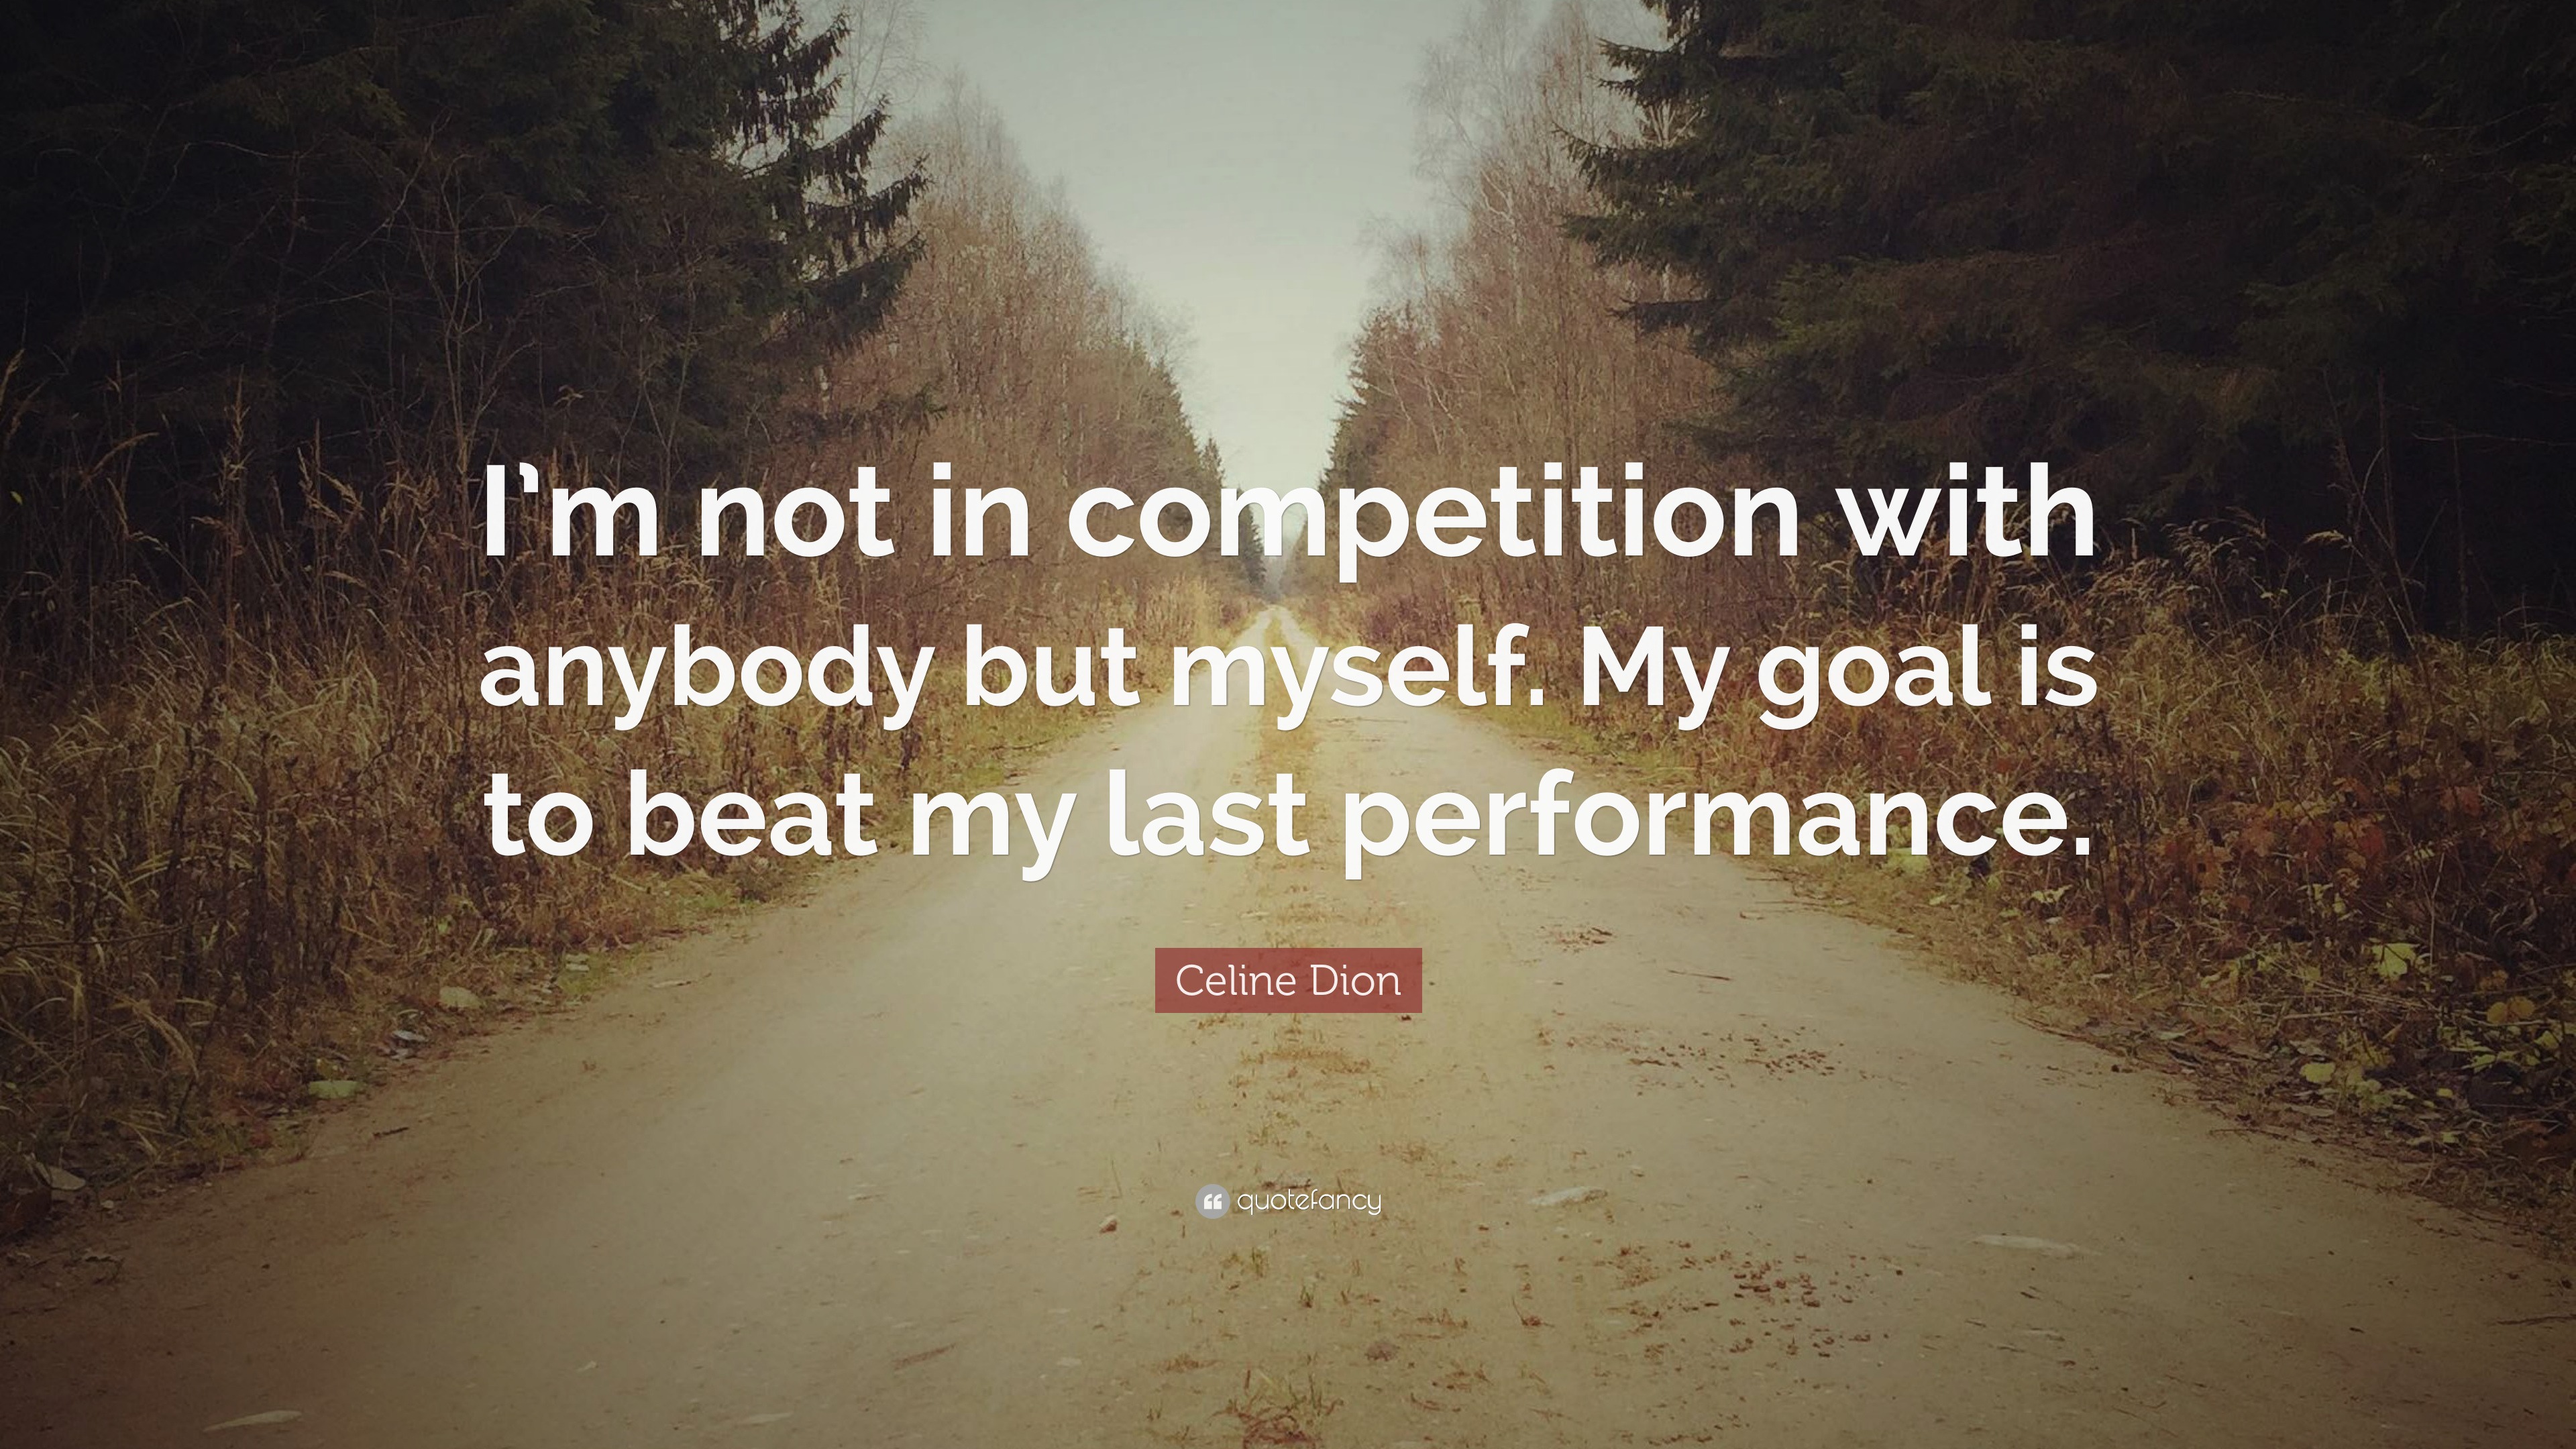 Celine Dion Quote: “I’m not in competition with anybody but myself. My